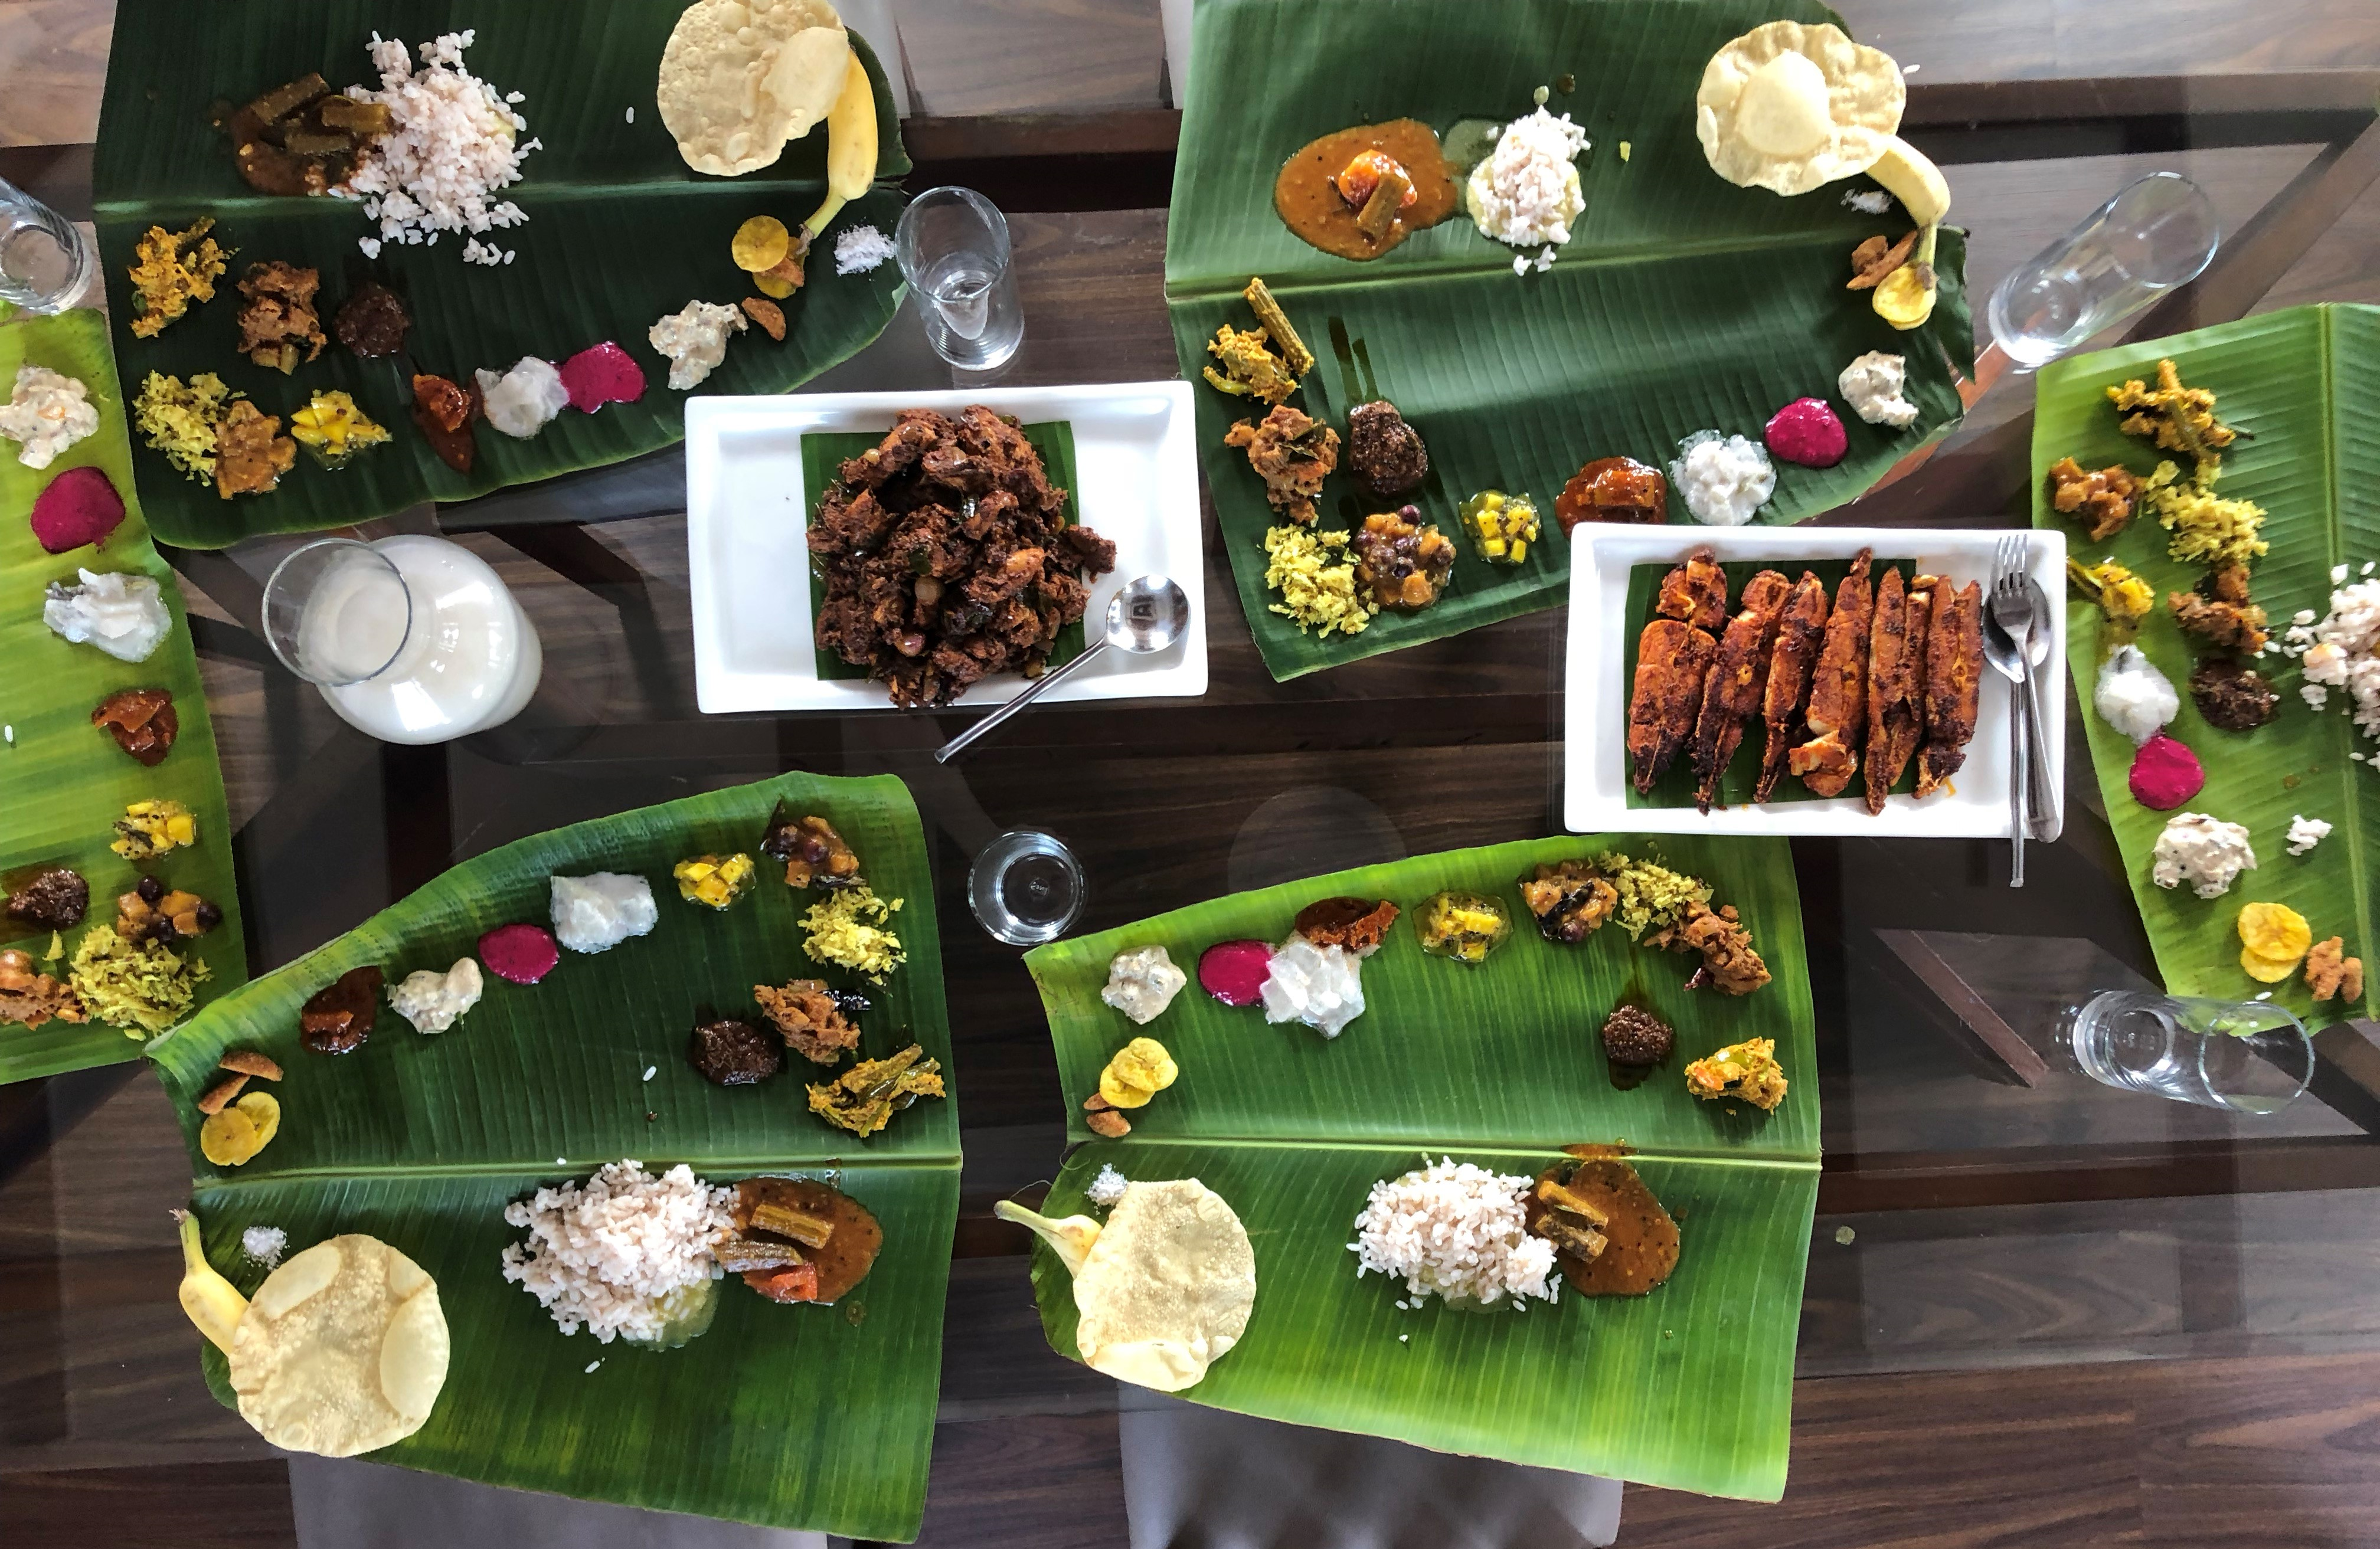 dewitt kendall tabletop and entertaining product development expert sustainable tableware banana leaves sadhya